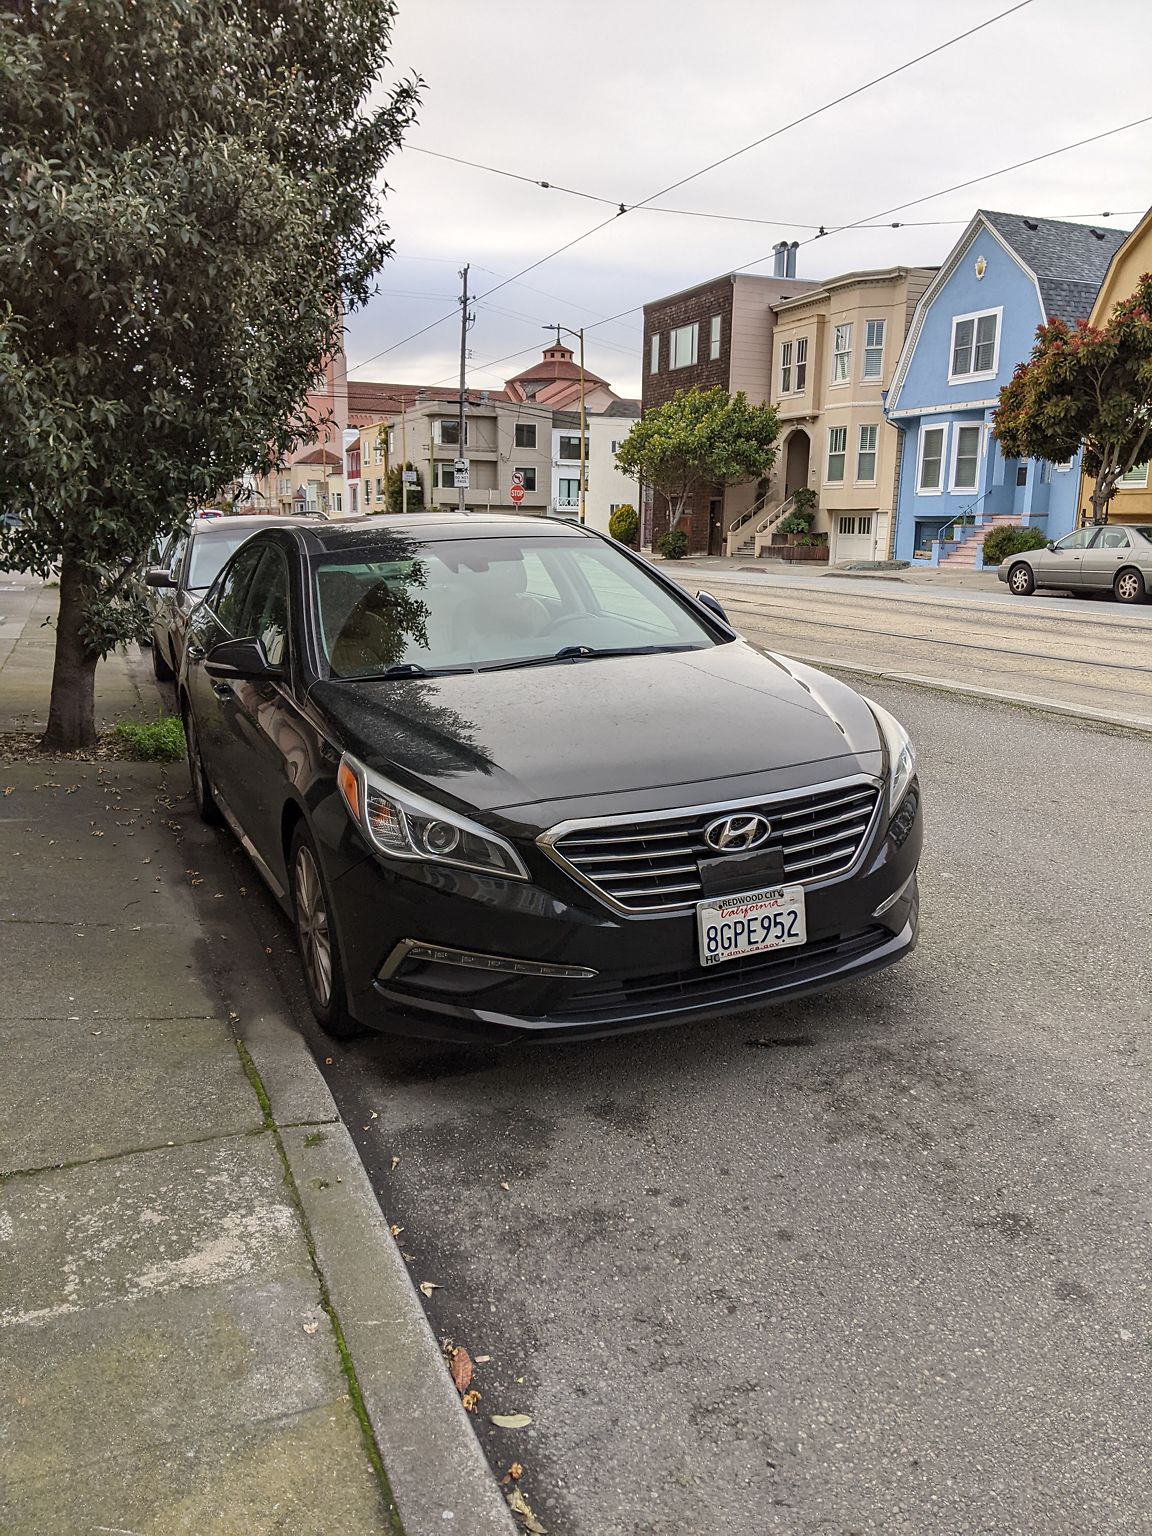 Photo of car in the street with license plate 8GPE952 in California